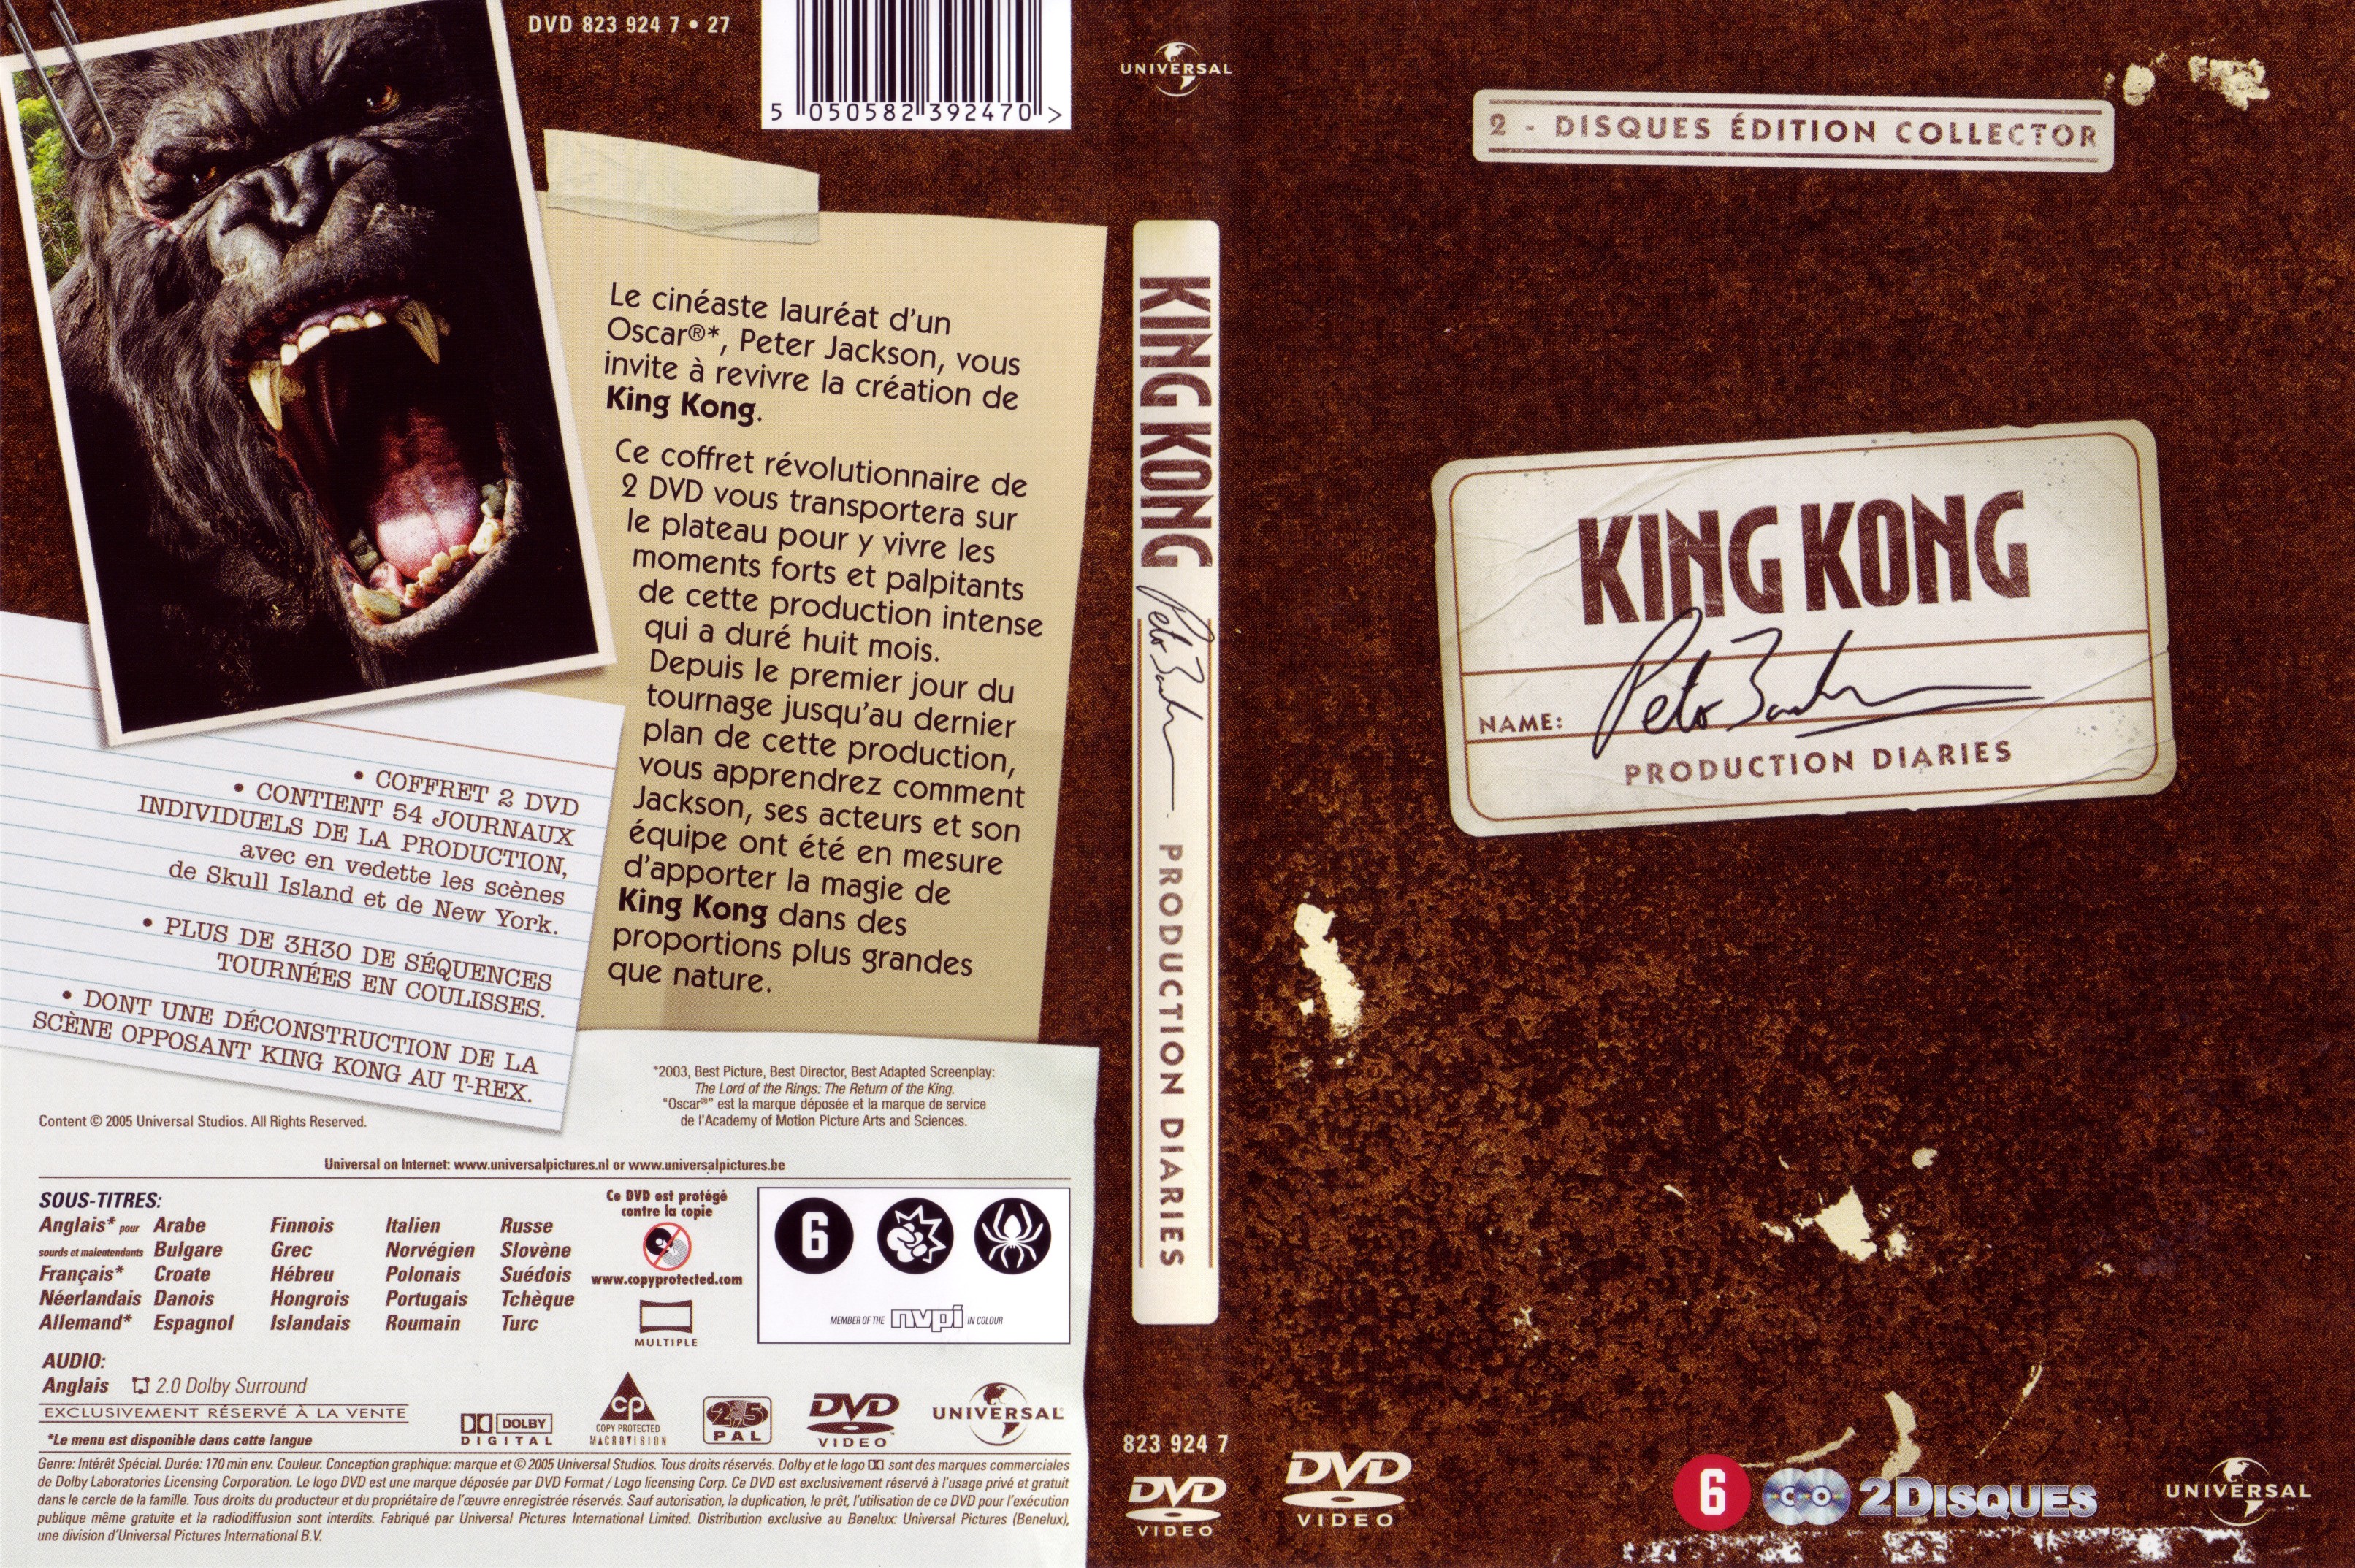 Jaquette DVD King Kong 2005 Making of